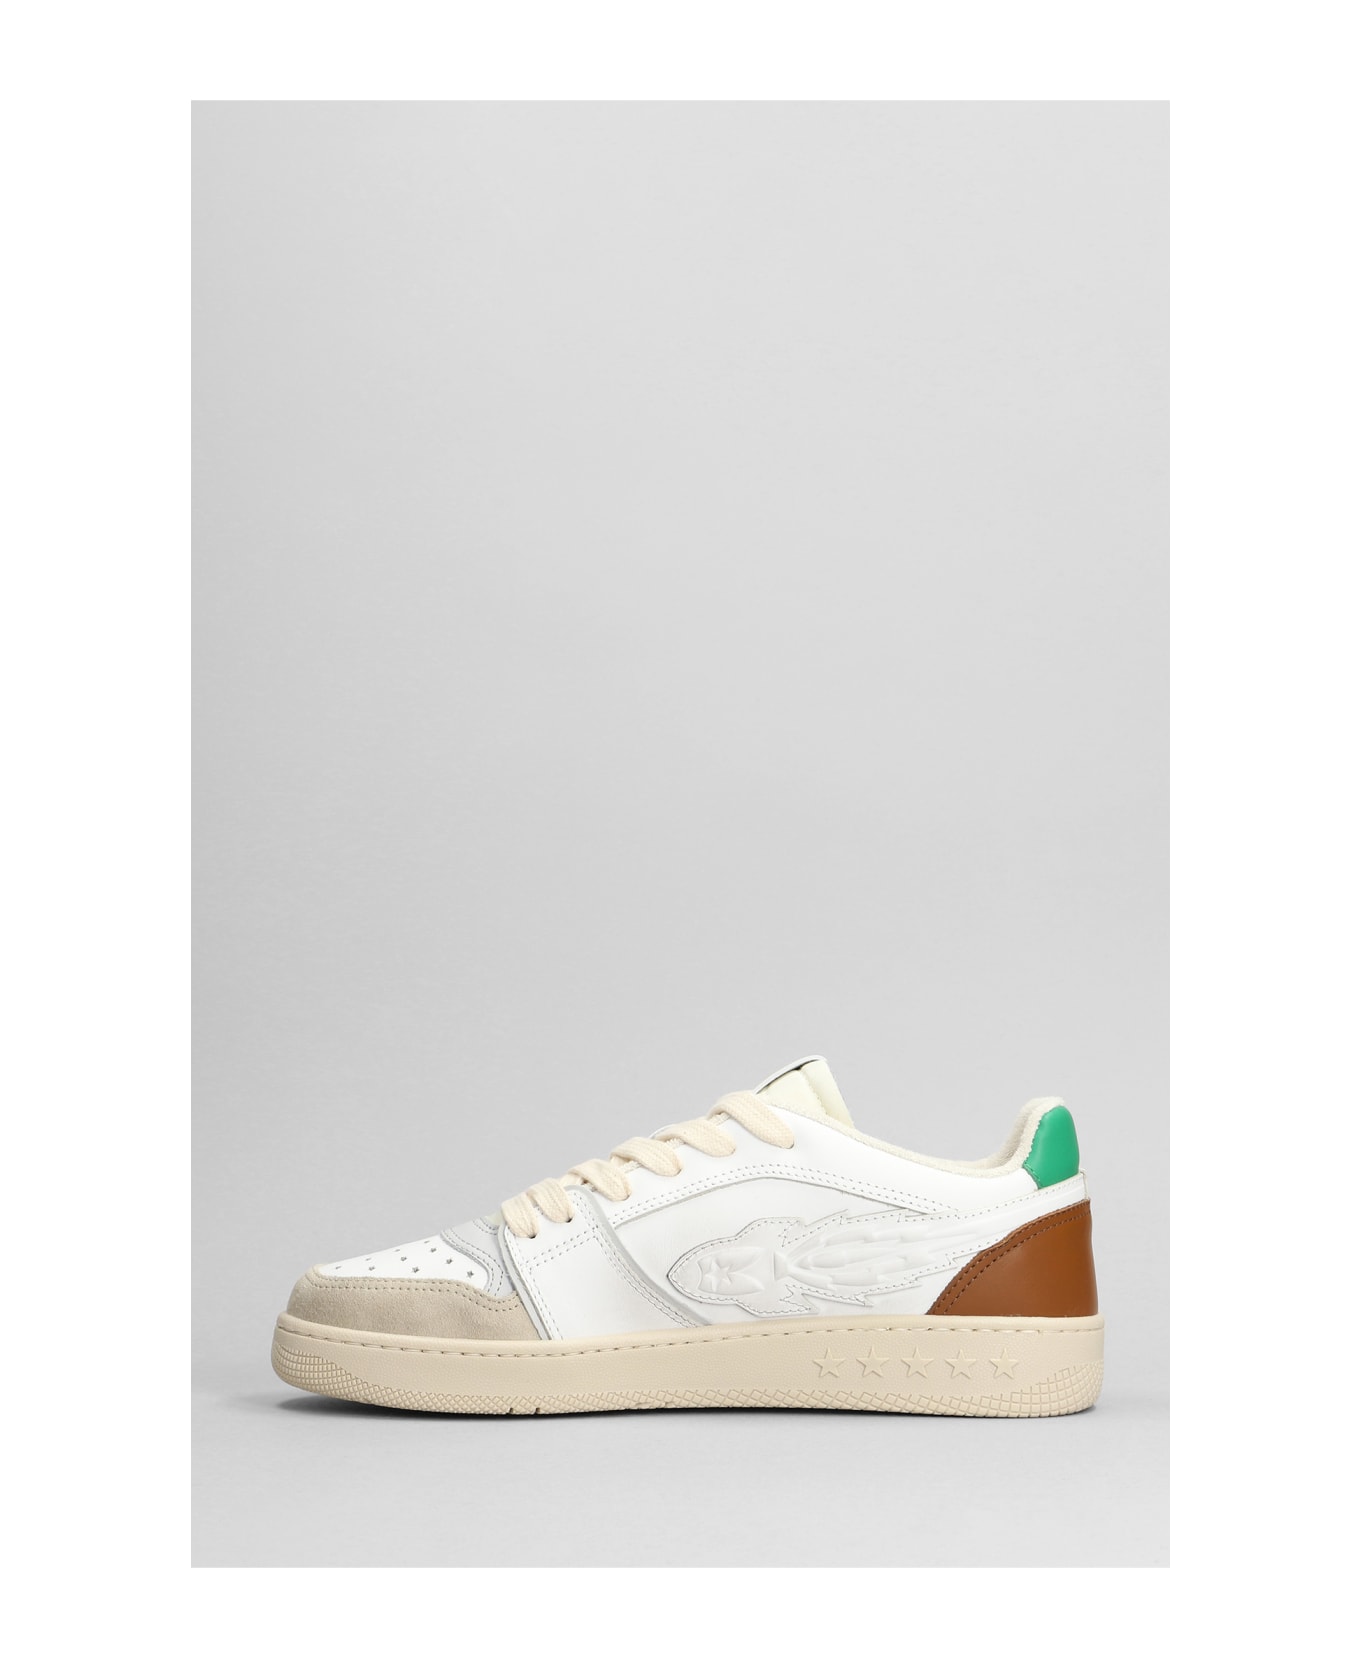 Enterprise Japan Sneakers In White Suede And Leather - white